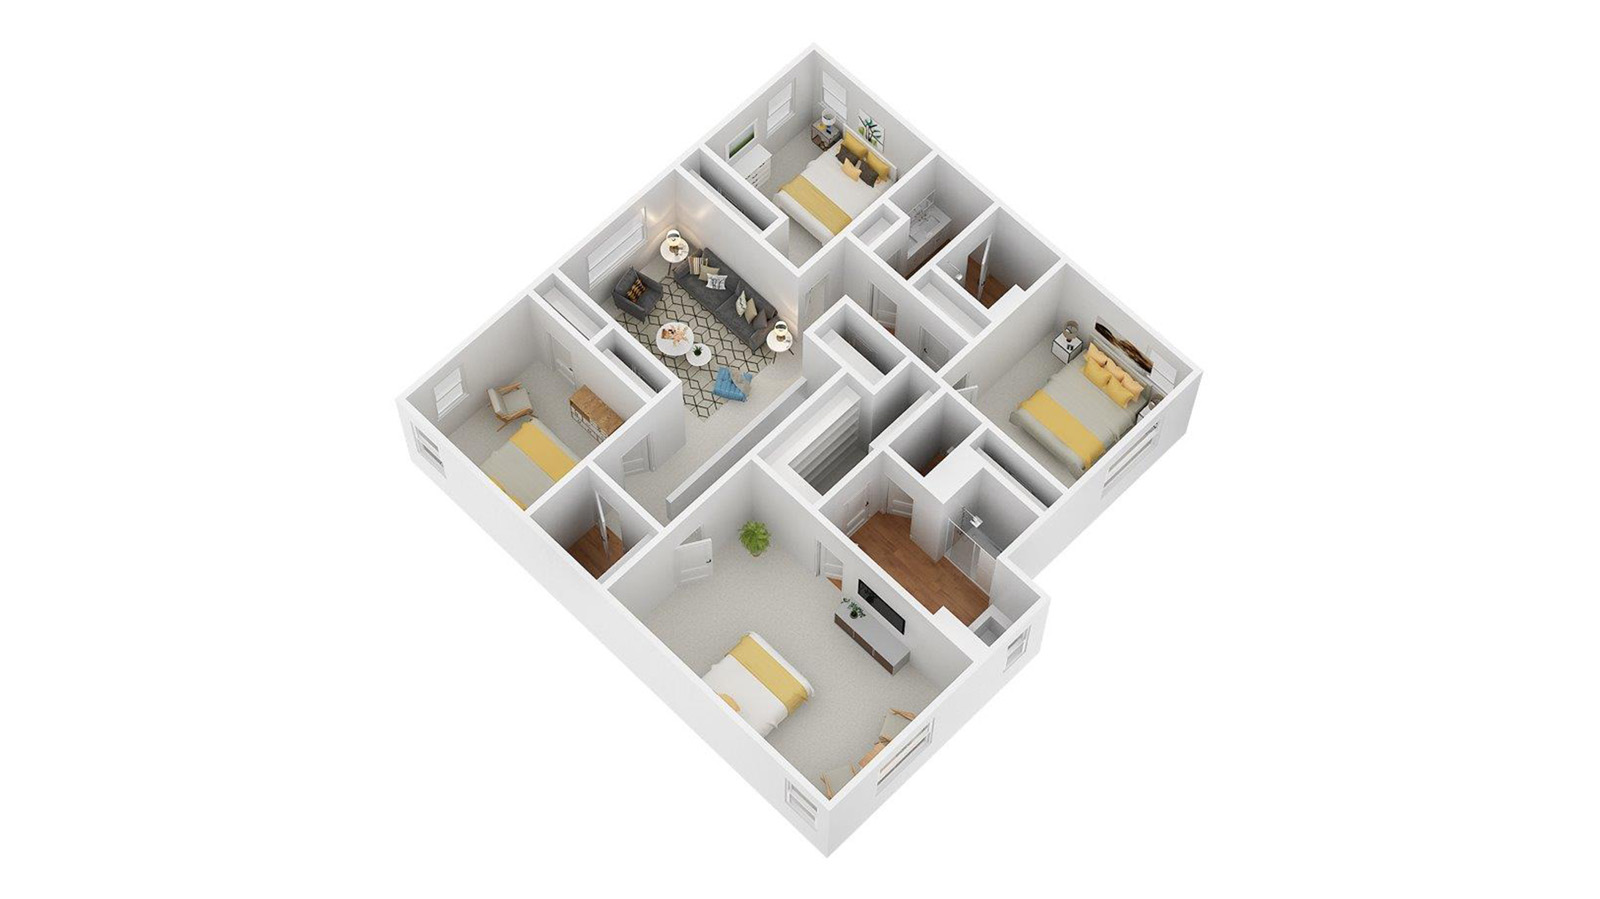 3D Floorplan with furniture located throughout the home